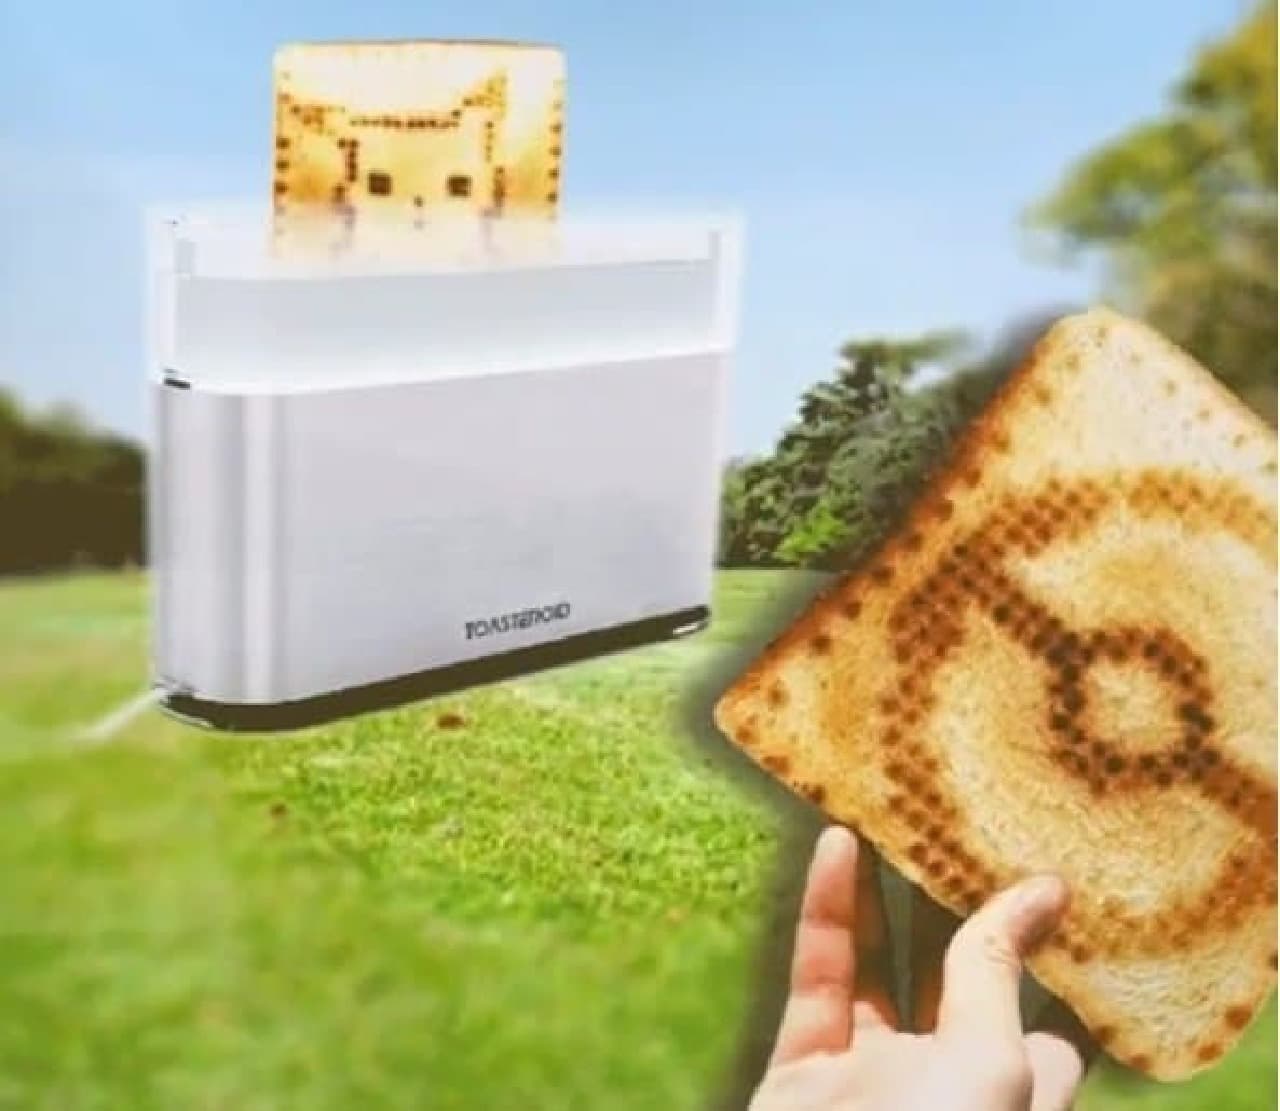 Toaster "Toasteroid" controlled by smartphone app